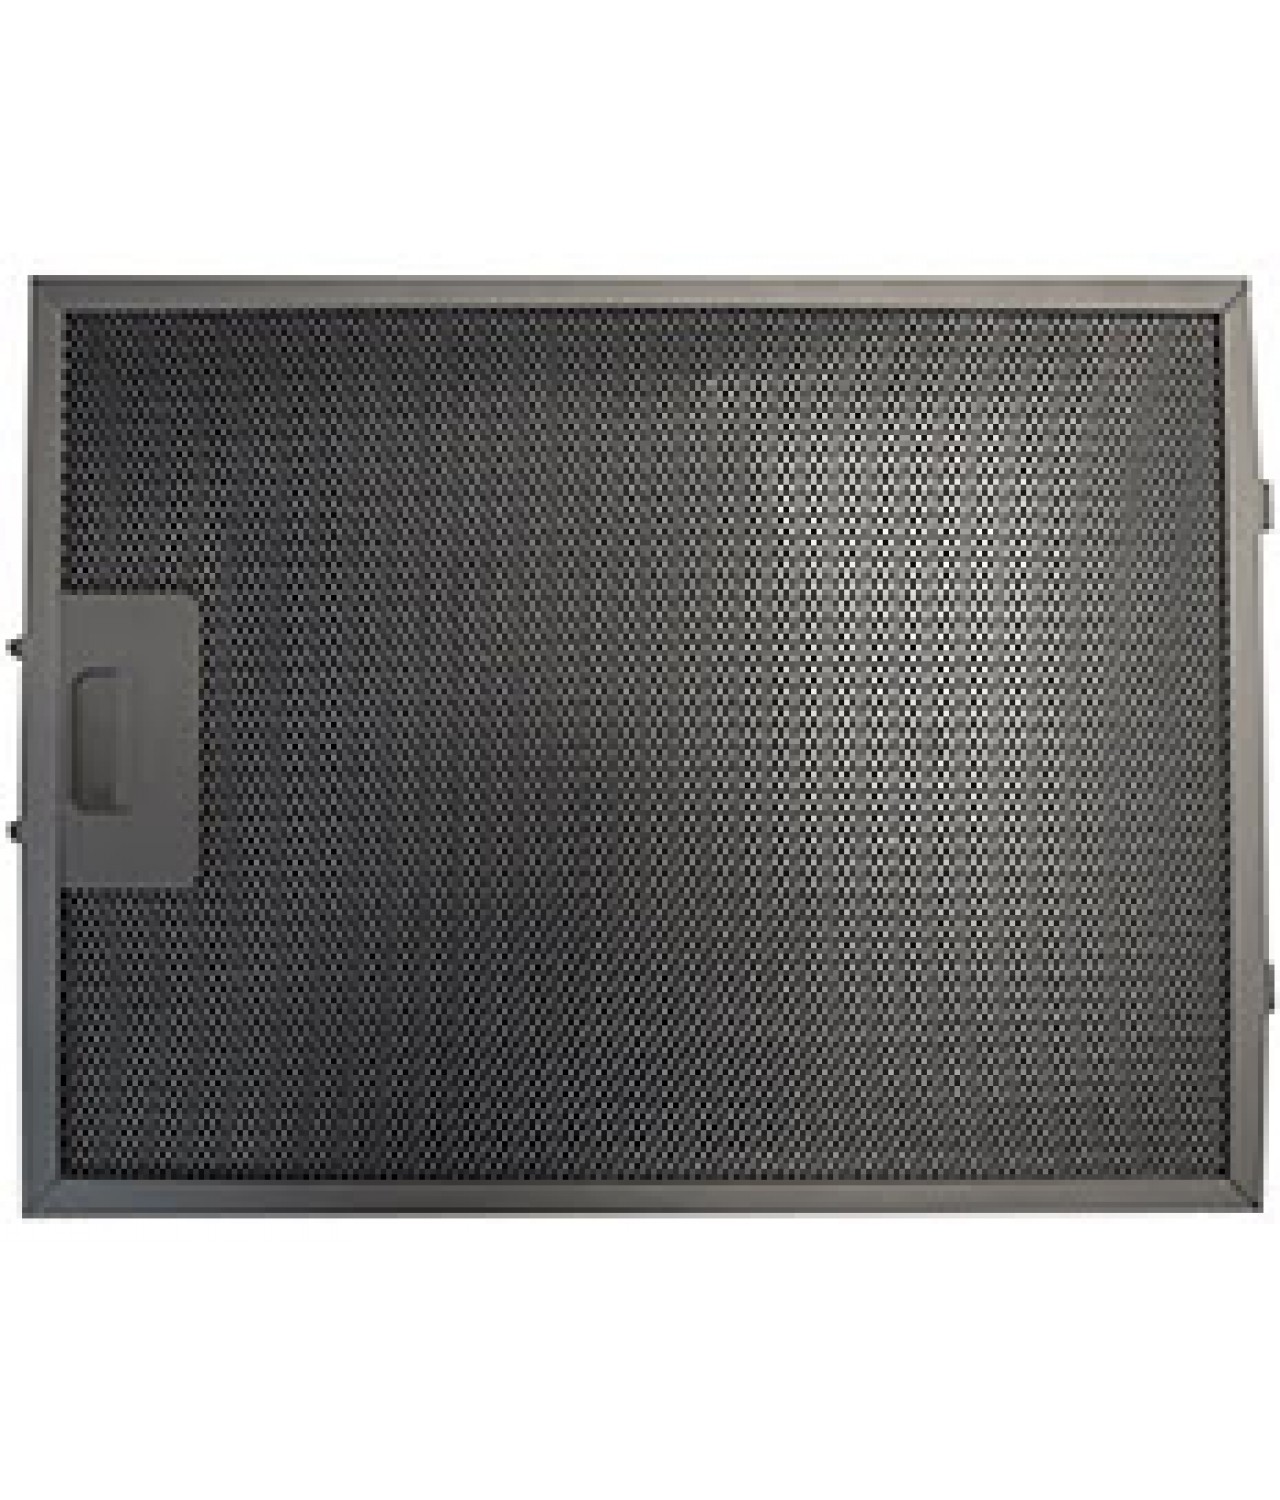 535.19.2000.9 - activated carbon filter for recirculating cooker hood Newcastle Maxi